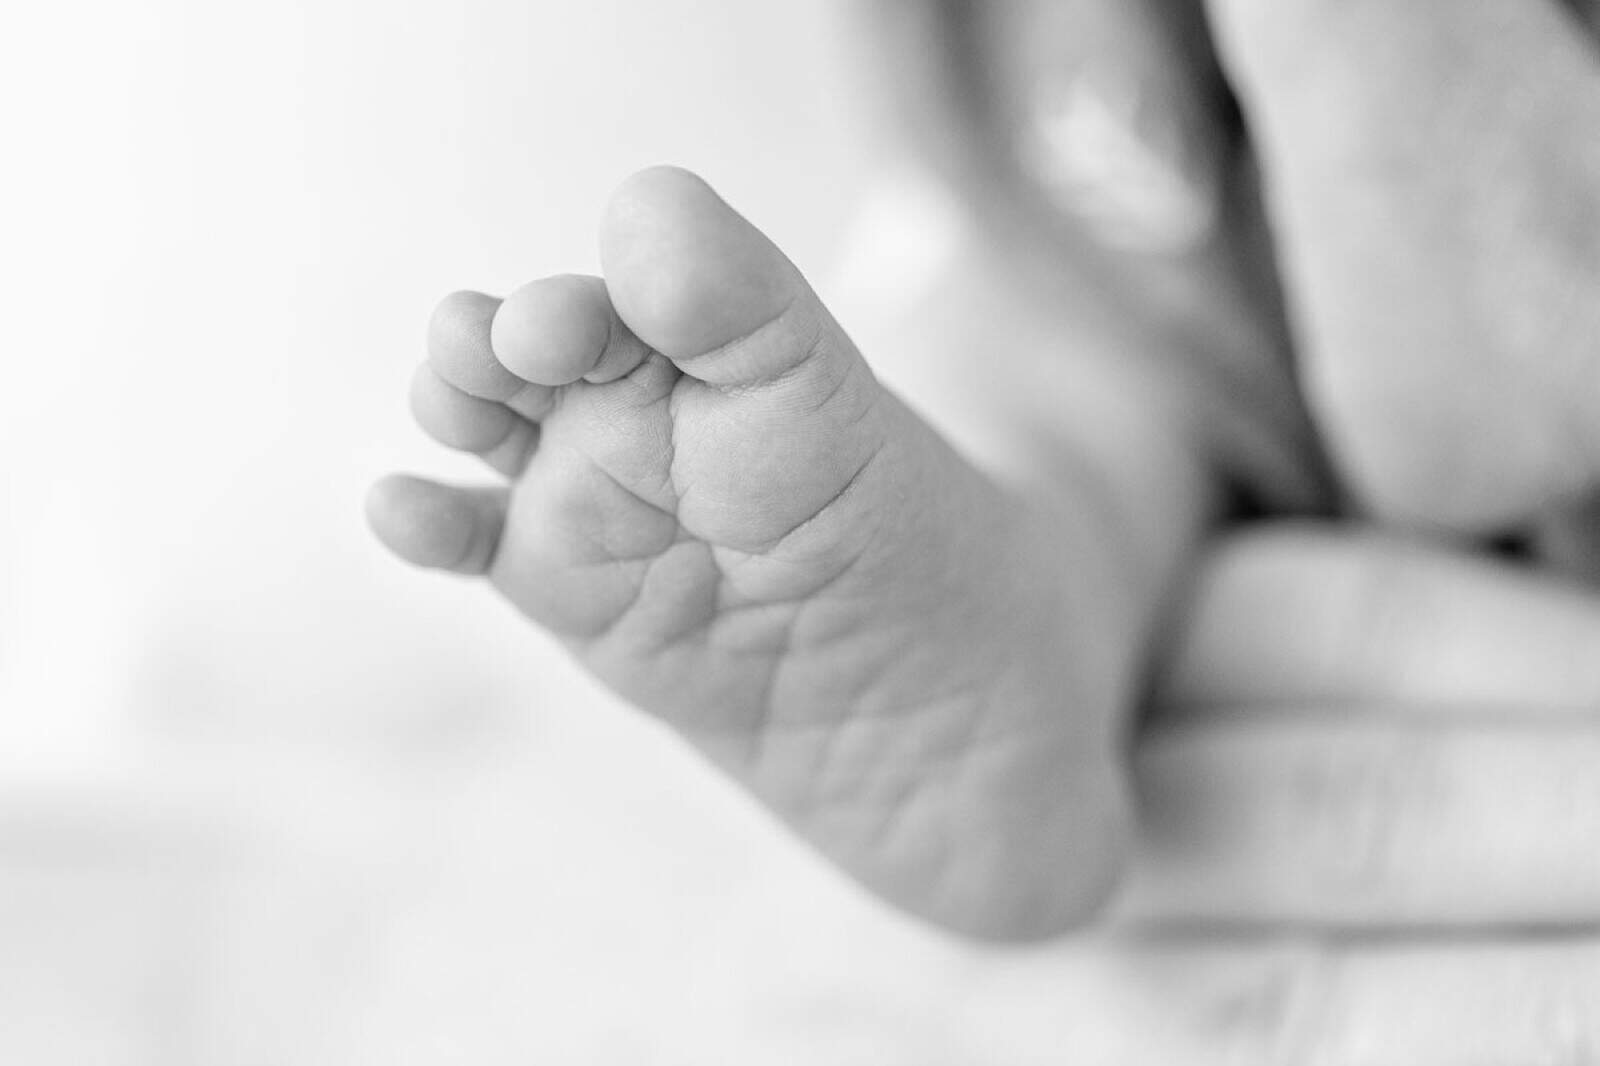 b/w image of baby foot